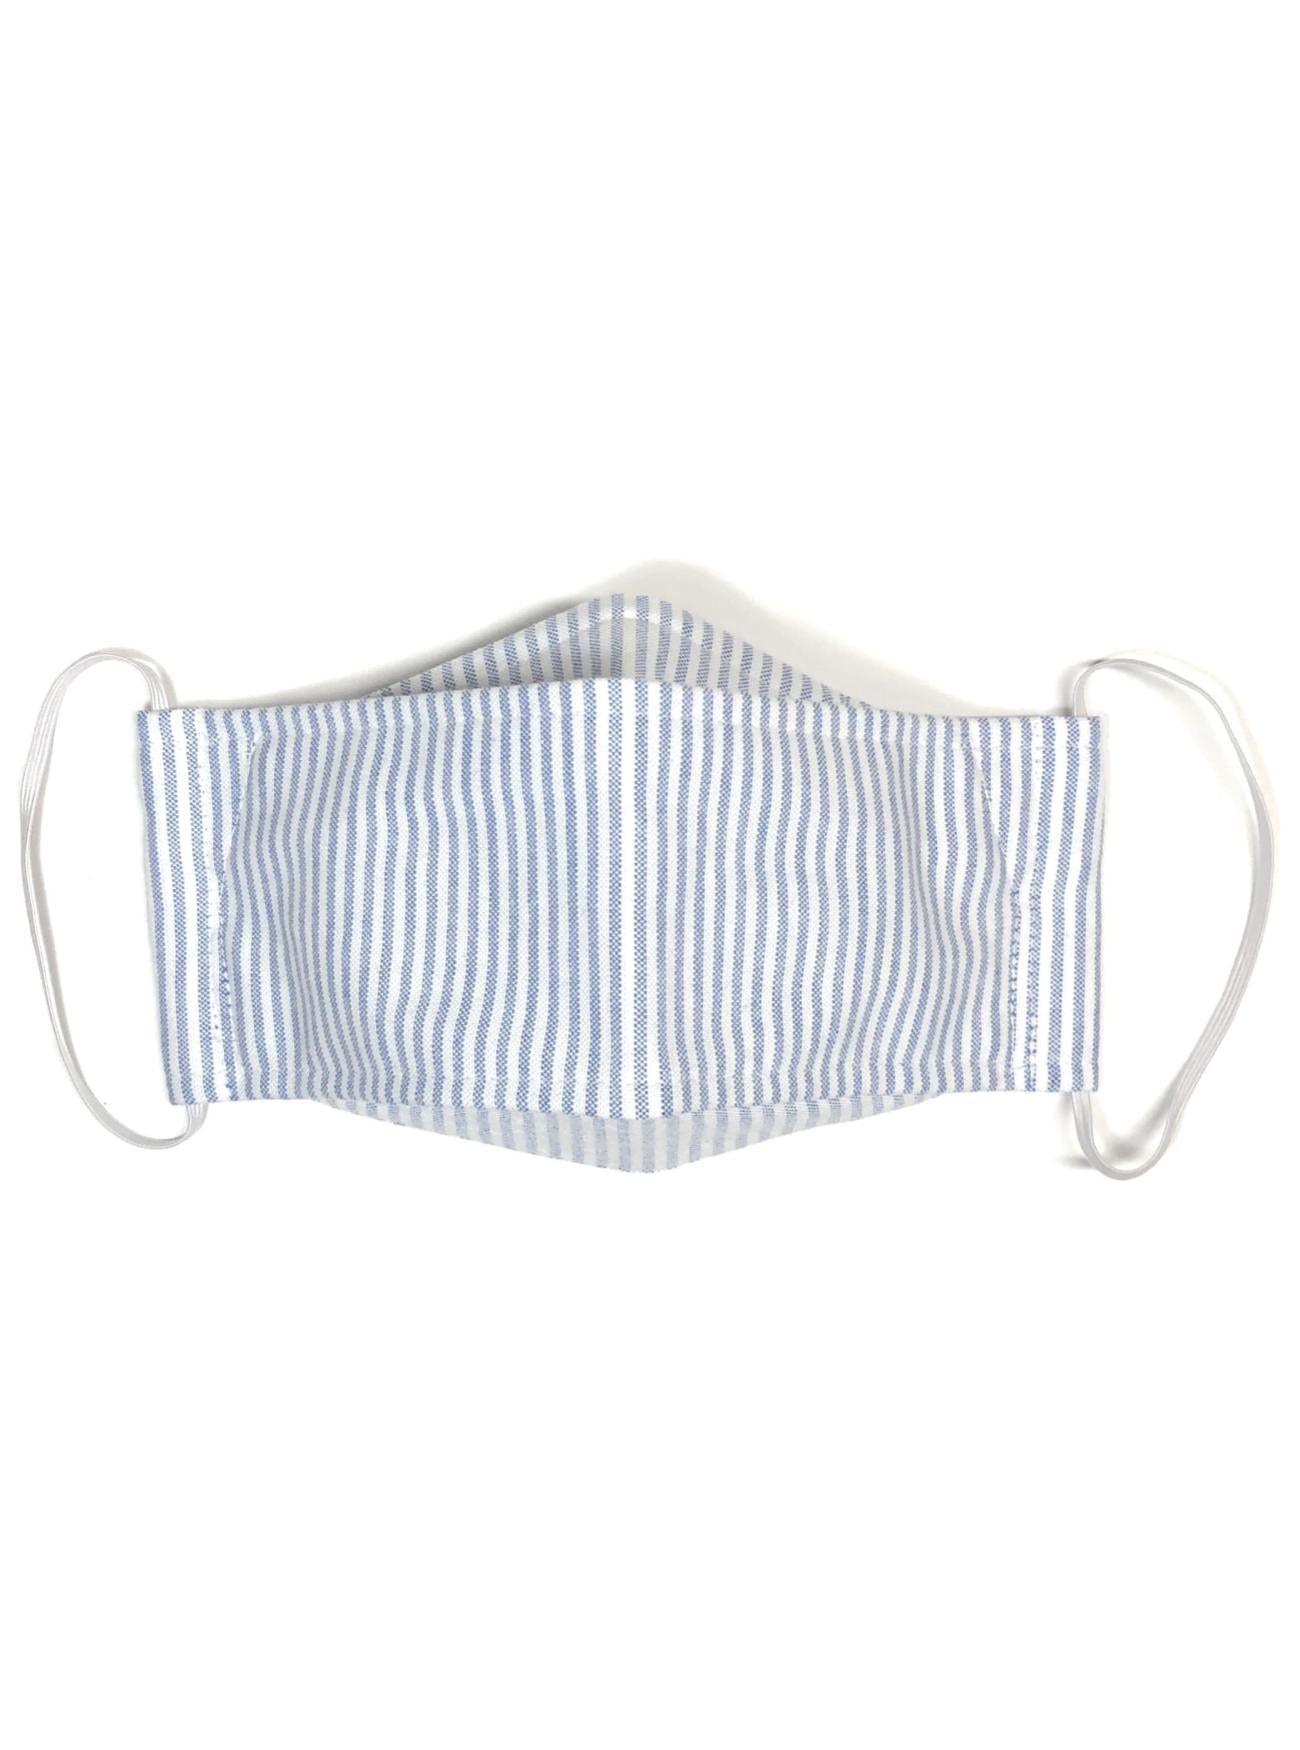 Oxford Pinstripe Blue, Reusable Face Mask [2-layers]